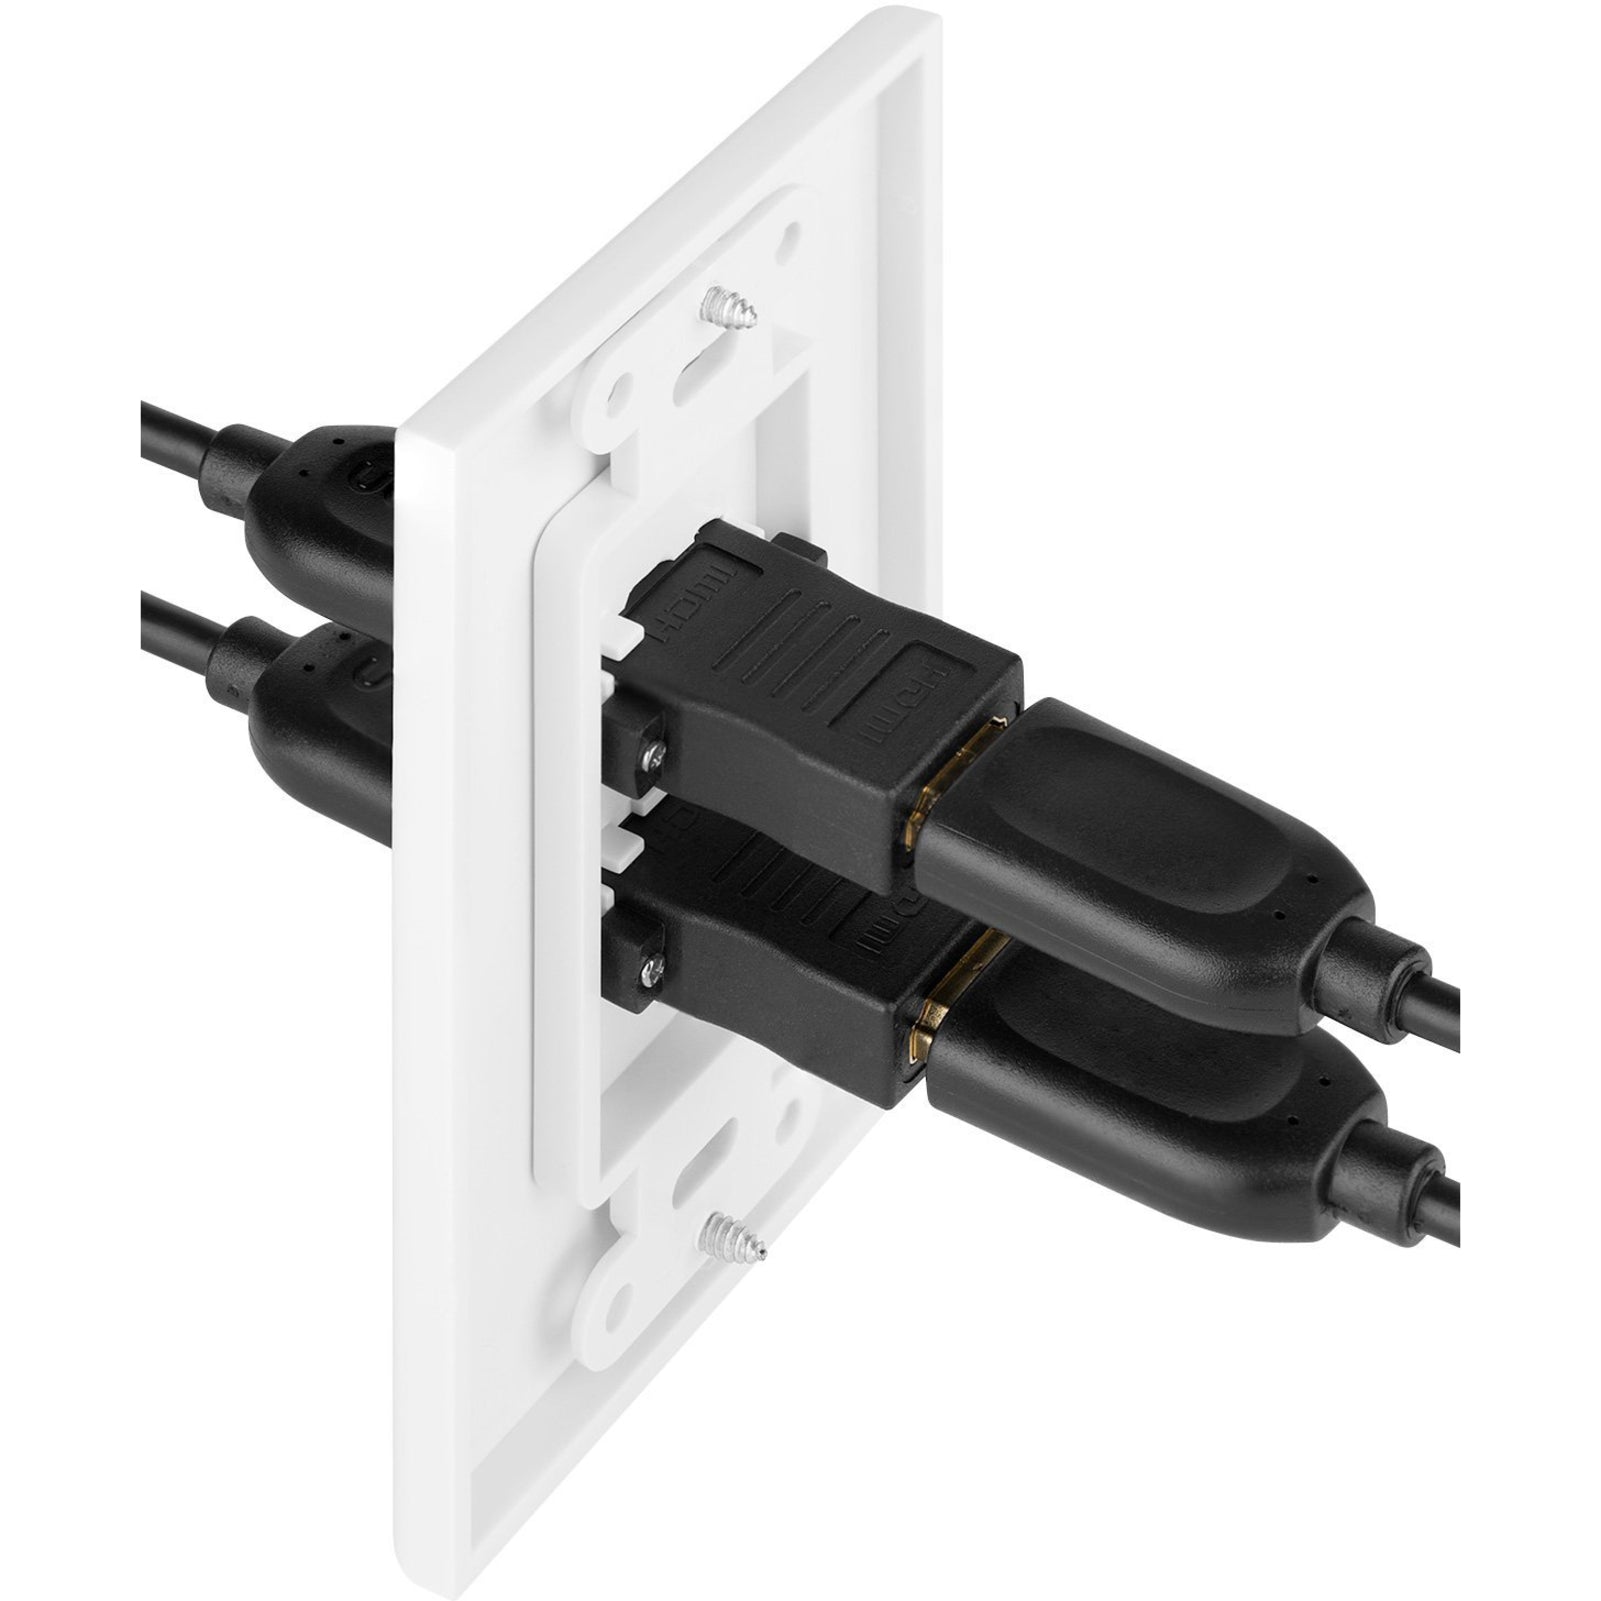 4XEM 4XWALLHDMI2 2 Port Female HDMI Wall Plate, Designed for Secure and Easy HDMI Connections